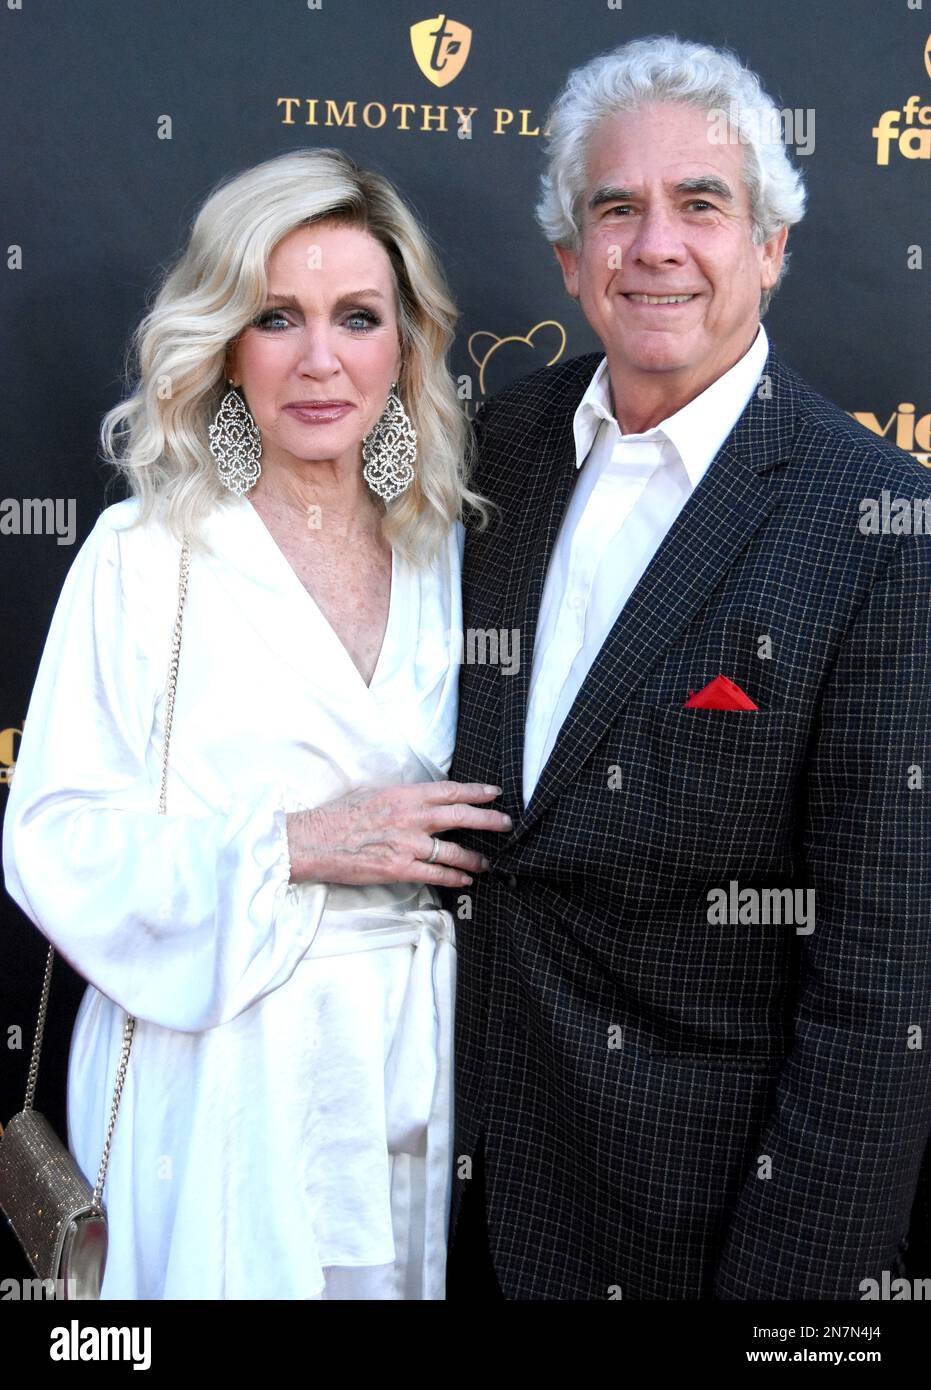 Hollywood California Usa 10th February 2023 Actress Donna Mills And Actor Larry Gilman Attend 30th Annual Movieguide Awards At Avalon Theater On February 10 2023 In Hollywood California Usa Photo By Barry Kingalamy Live News 2N7N4J4 